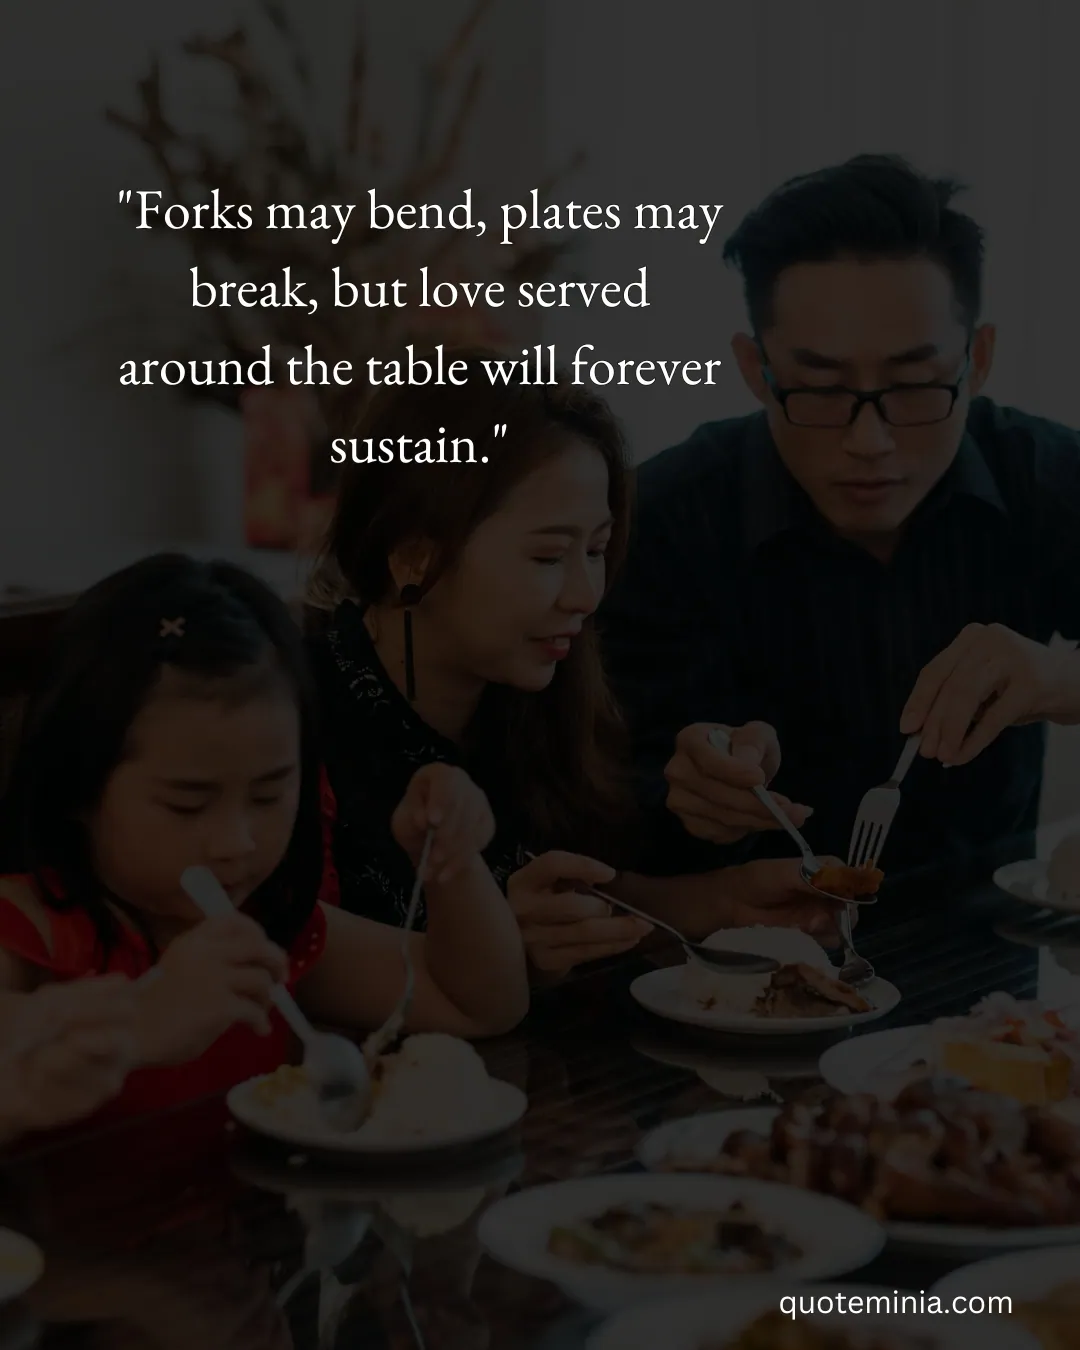 Quotes on Dinner with Family 1